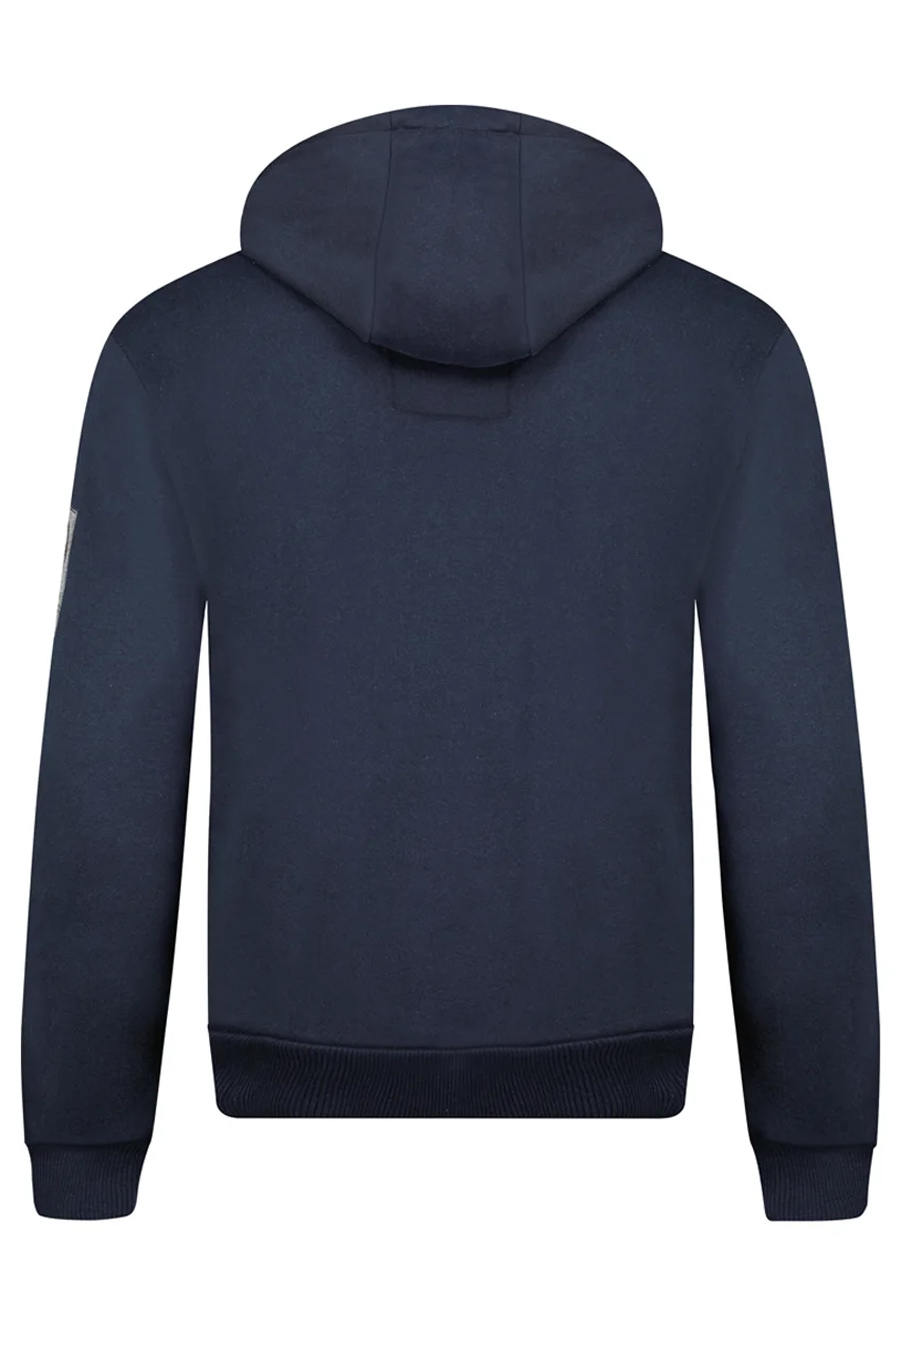 Zip up Hoodie GEOGRAPHICAL NORWAY GUESSY-Navy